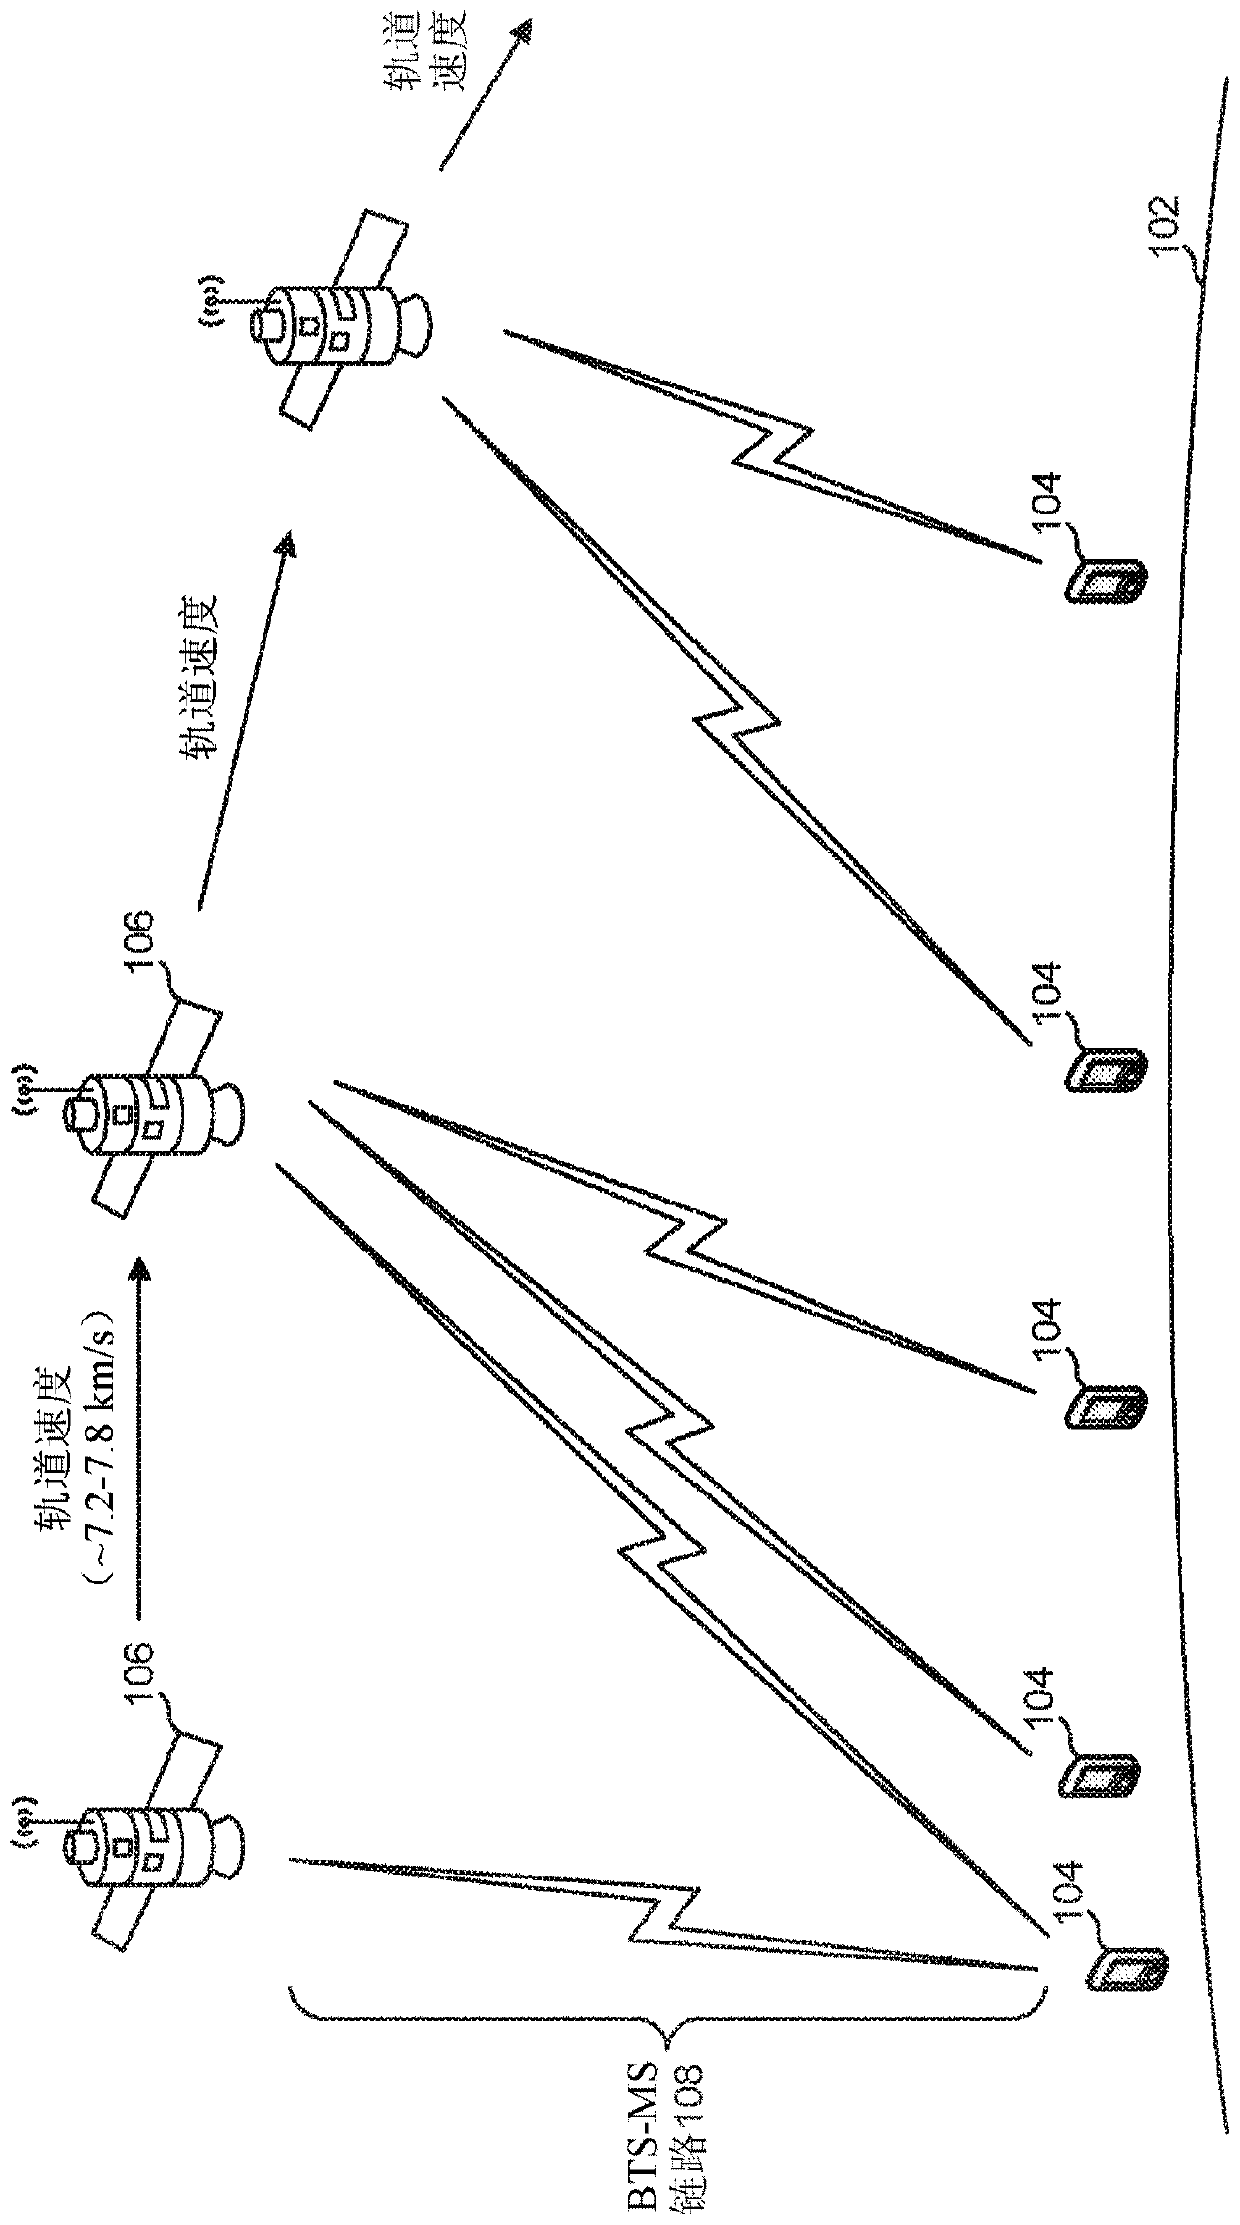 Method and apparatus for handling communications between spacecraft operating in an orbital environment and terrestrial telecommunications devices